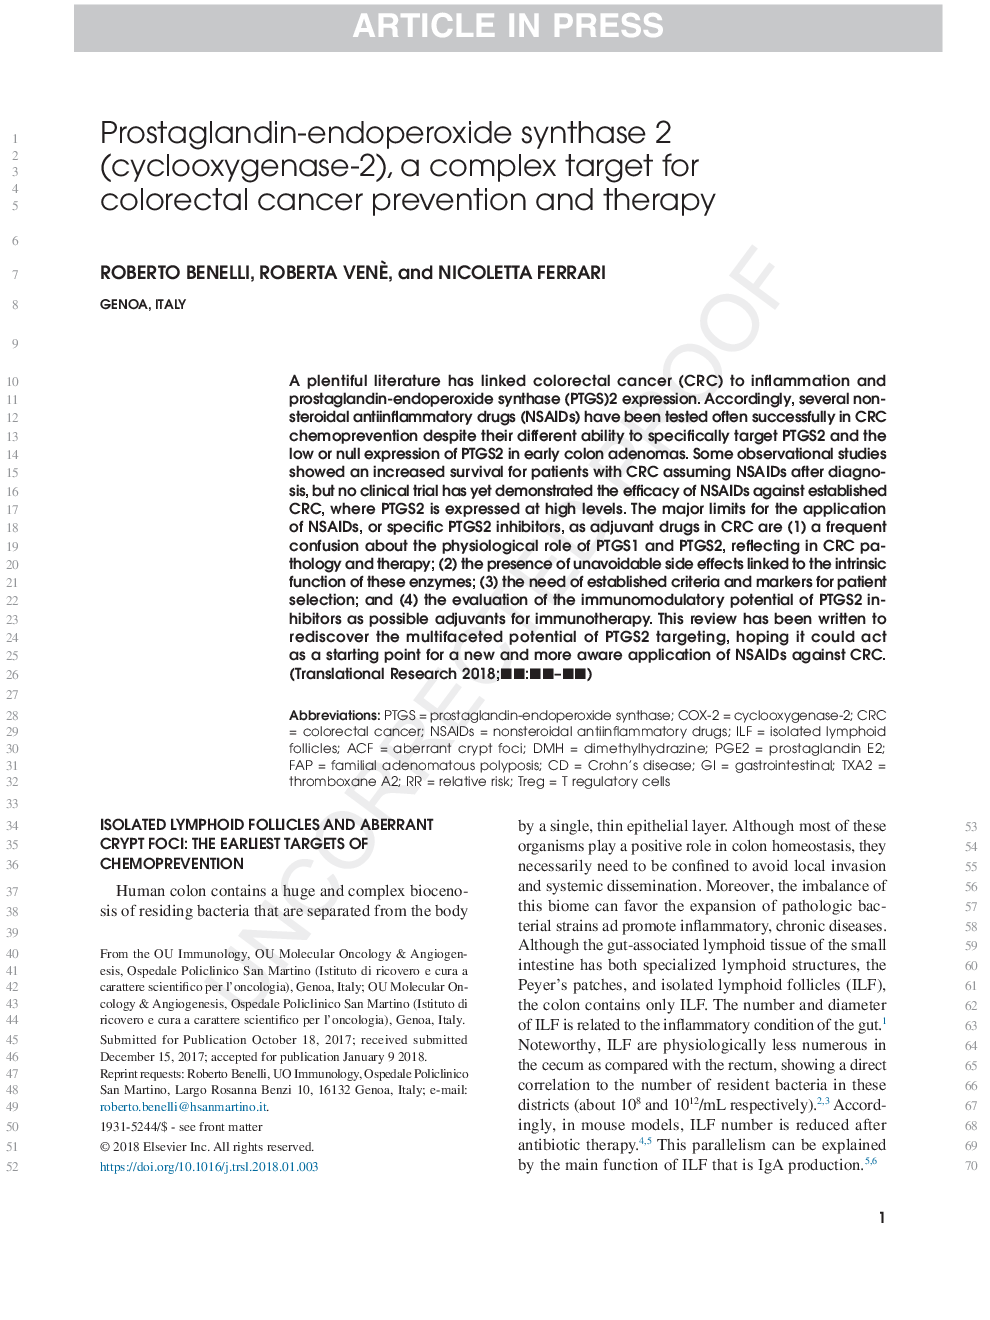 Prostaglandin-endoperoxide synthase 2 (cyclooxygenase-2), a complex target for colorectal cancer prevention and therapy